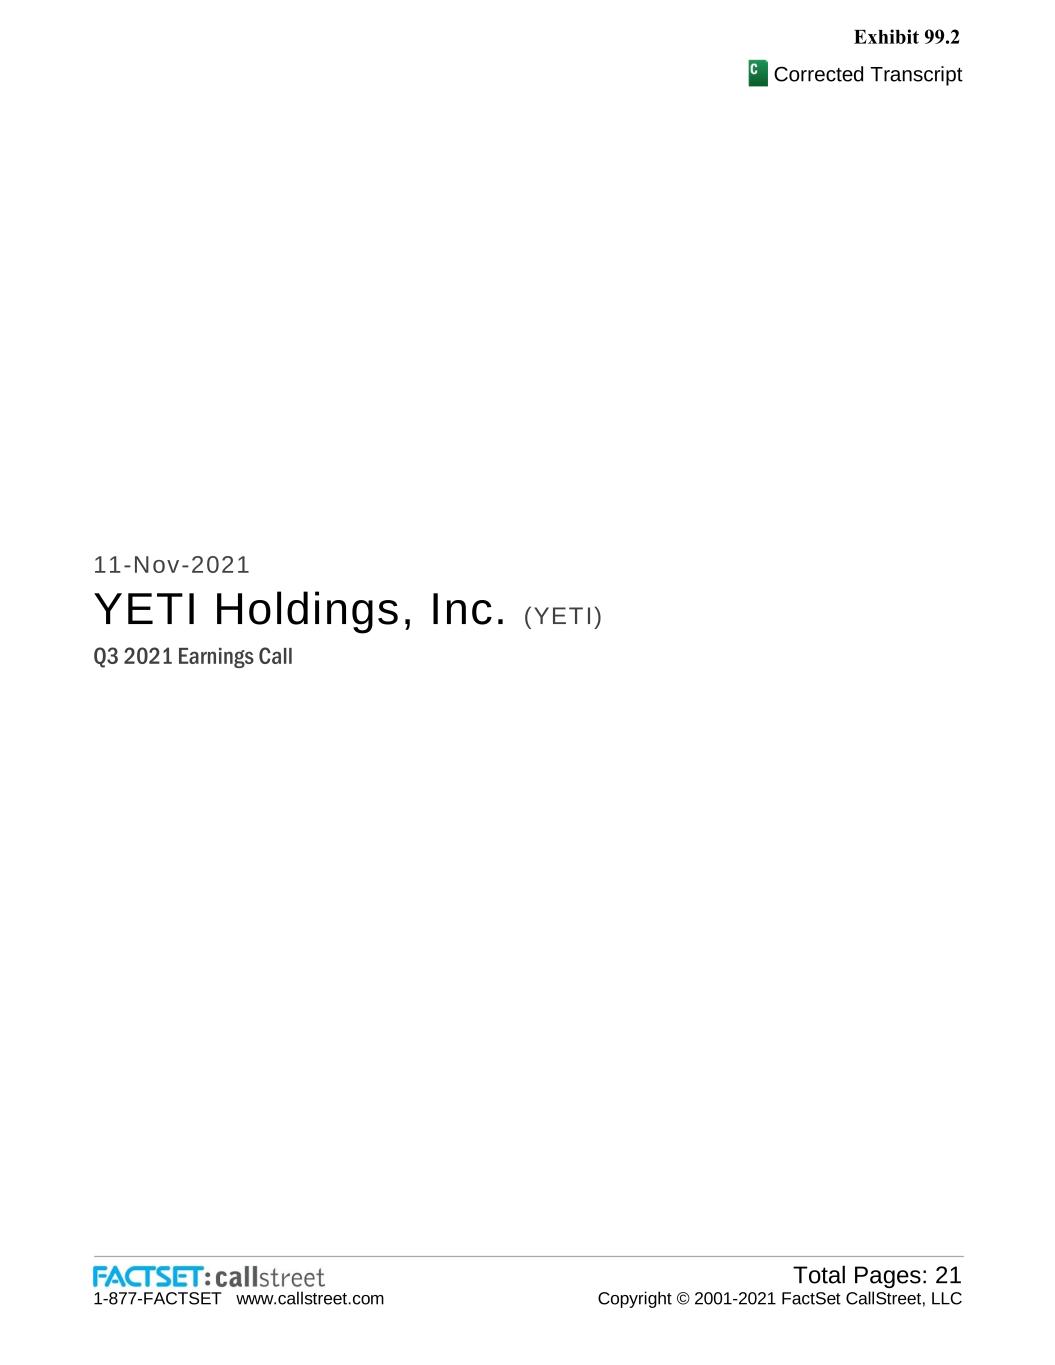 YETI Q4 Earnings Up Slightly After Recall Hit Sales